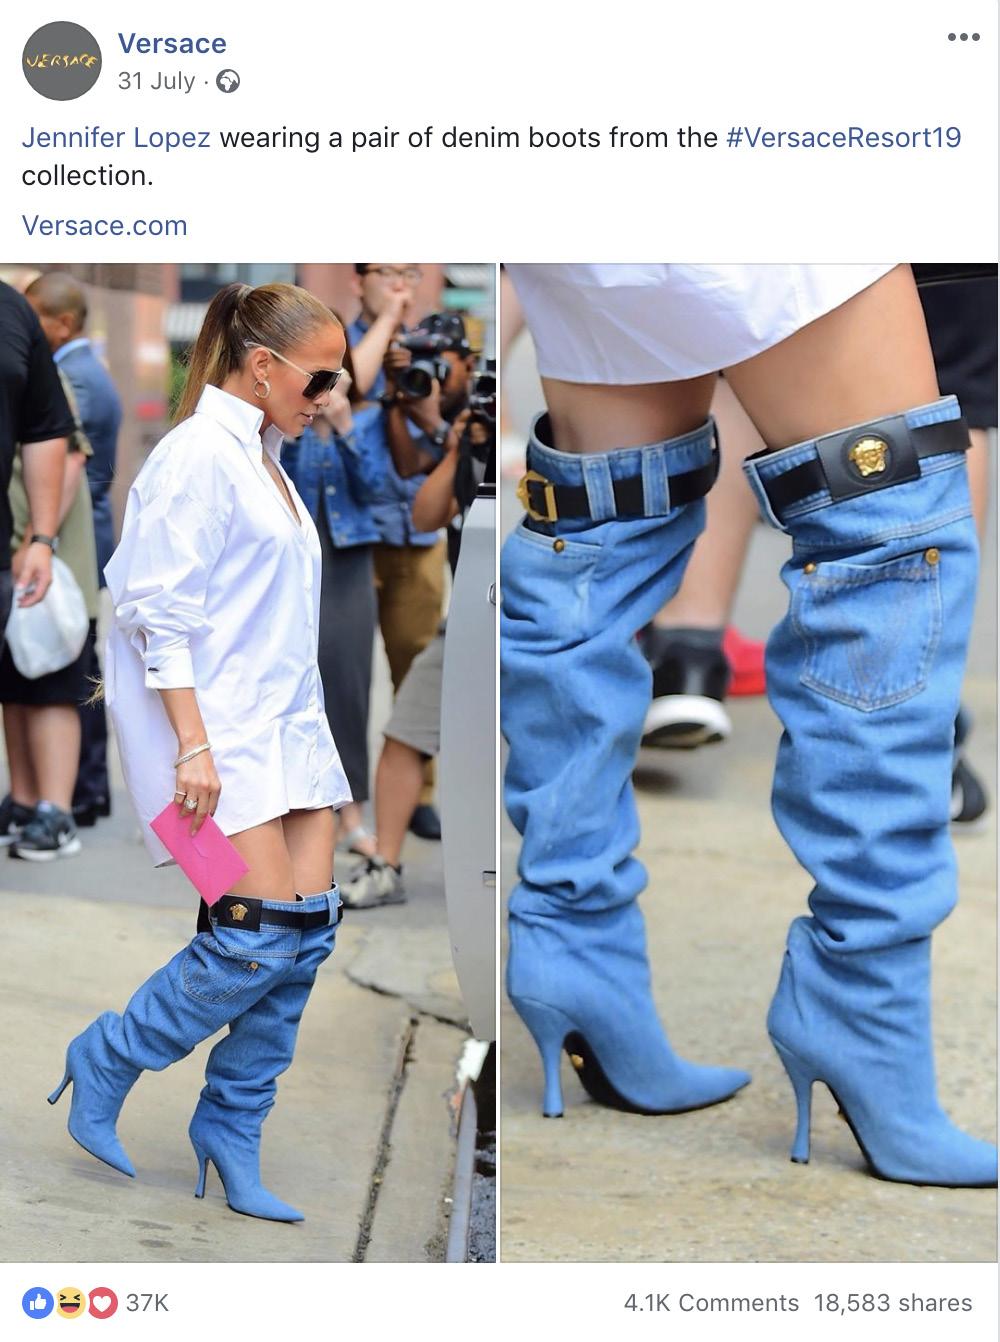 This post generated nearly 8K Haha reactions, with comments focusing on how the boots looked like her jeans had fallen down. Humor is not a usual response to posts by luxury brands.